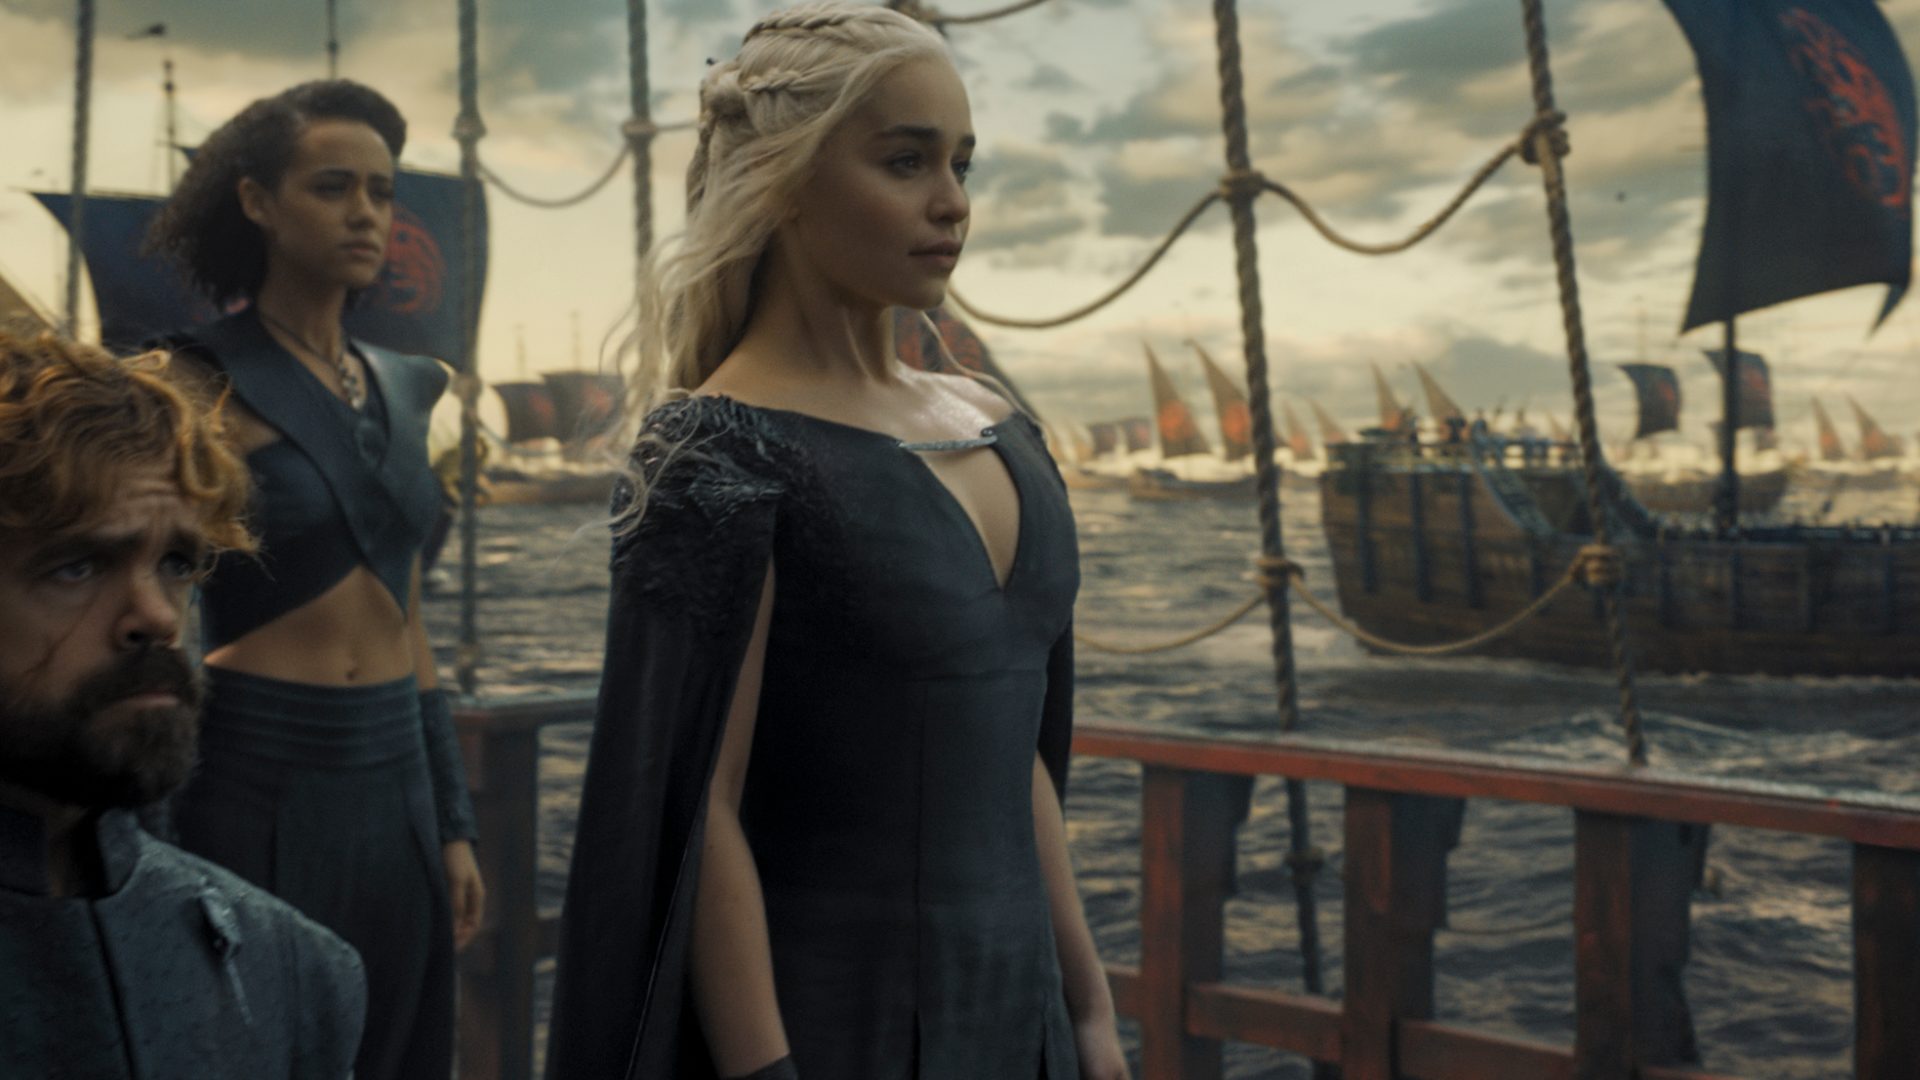 ‘Game of Thrones’ season 6 finale scores record ratings